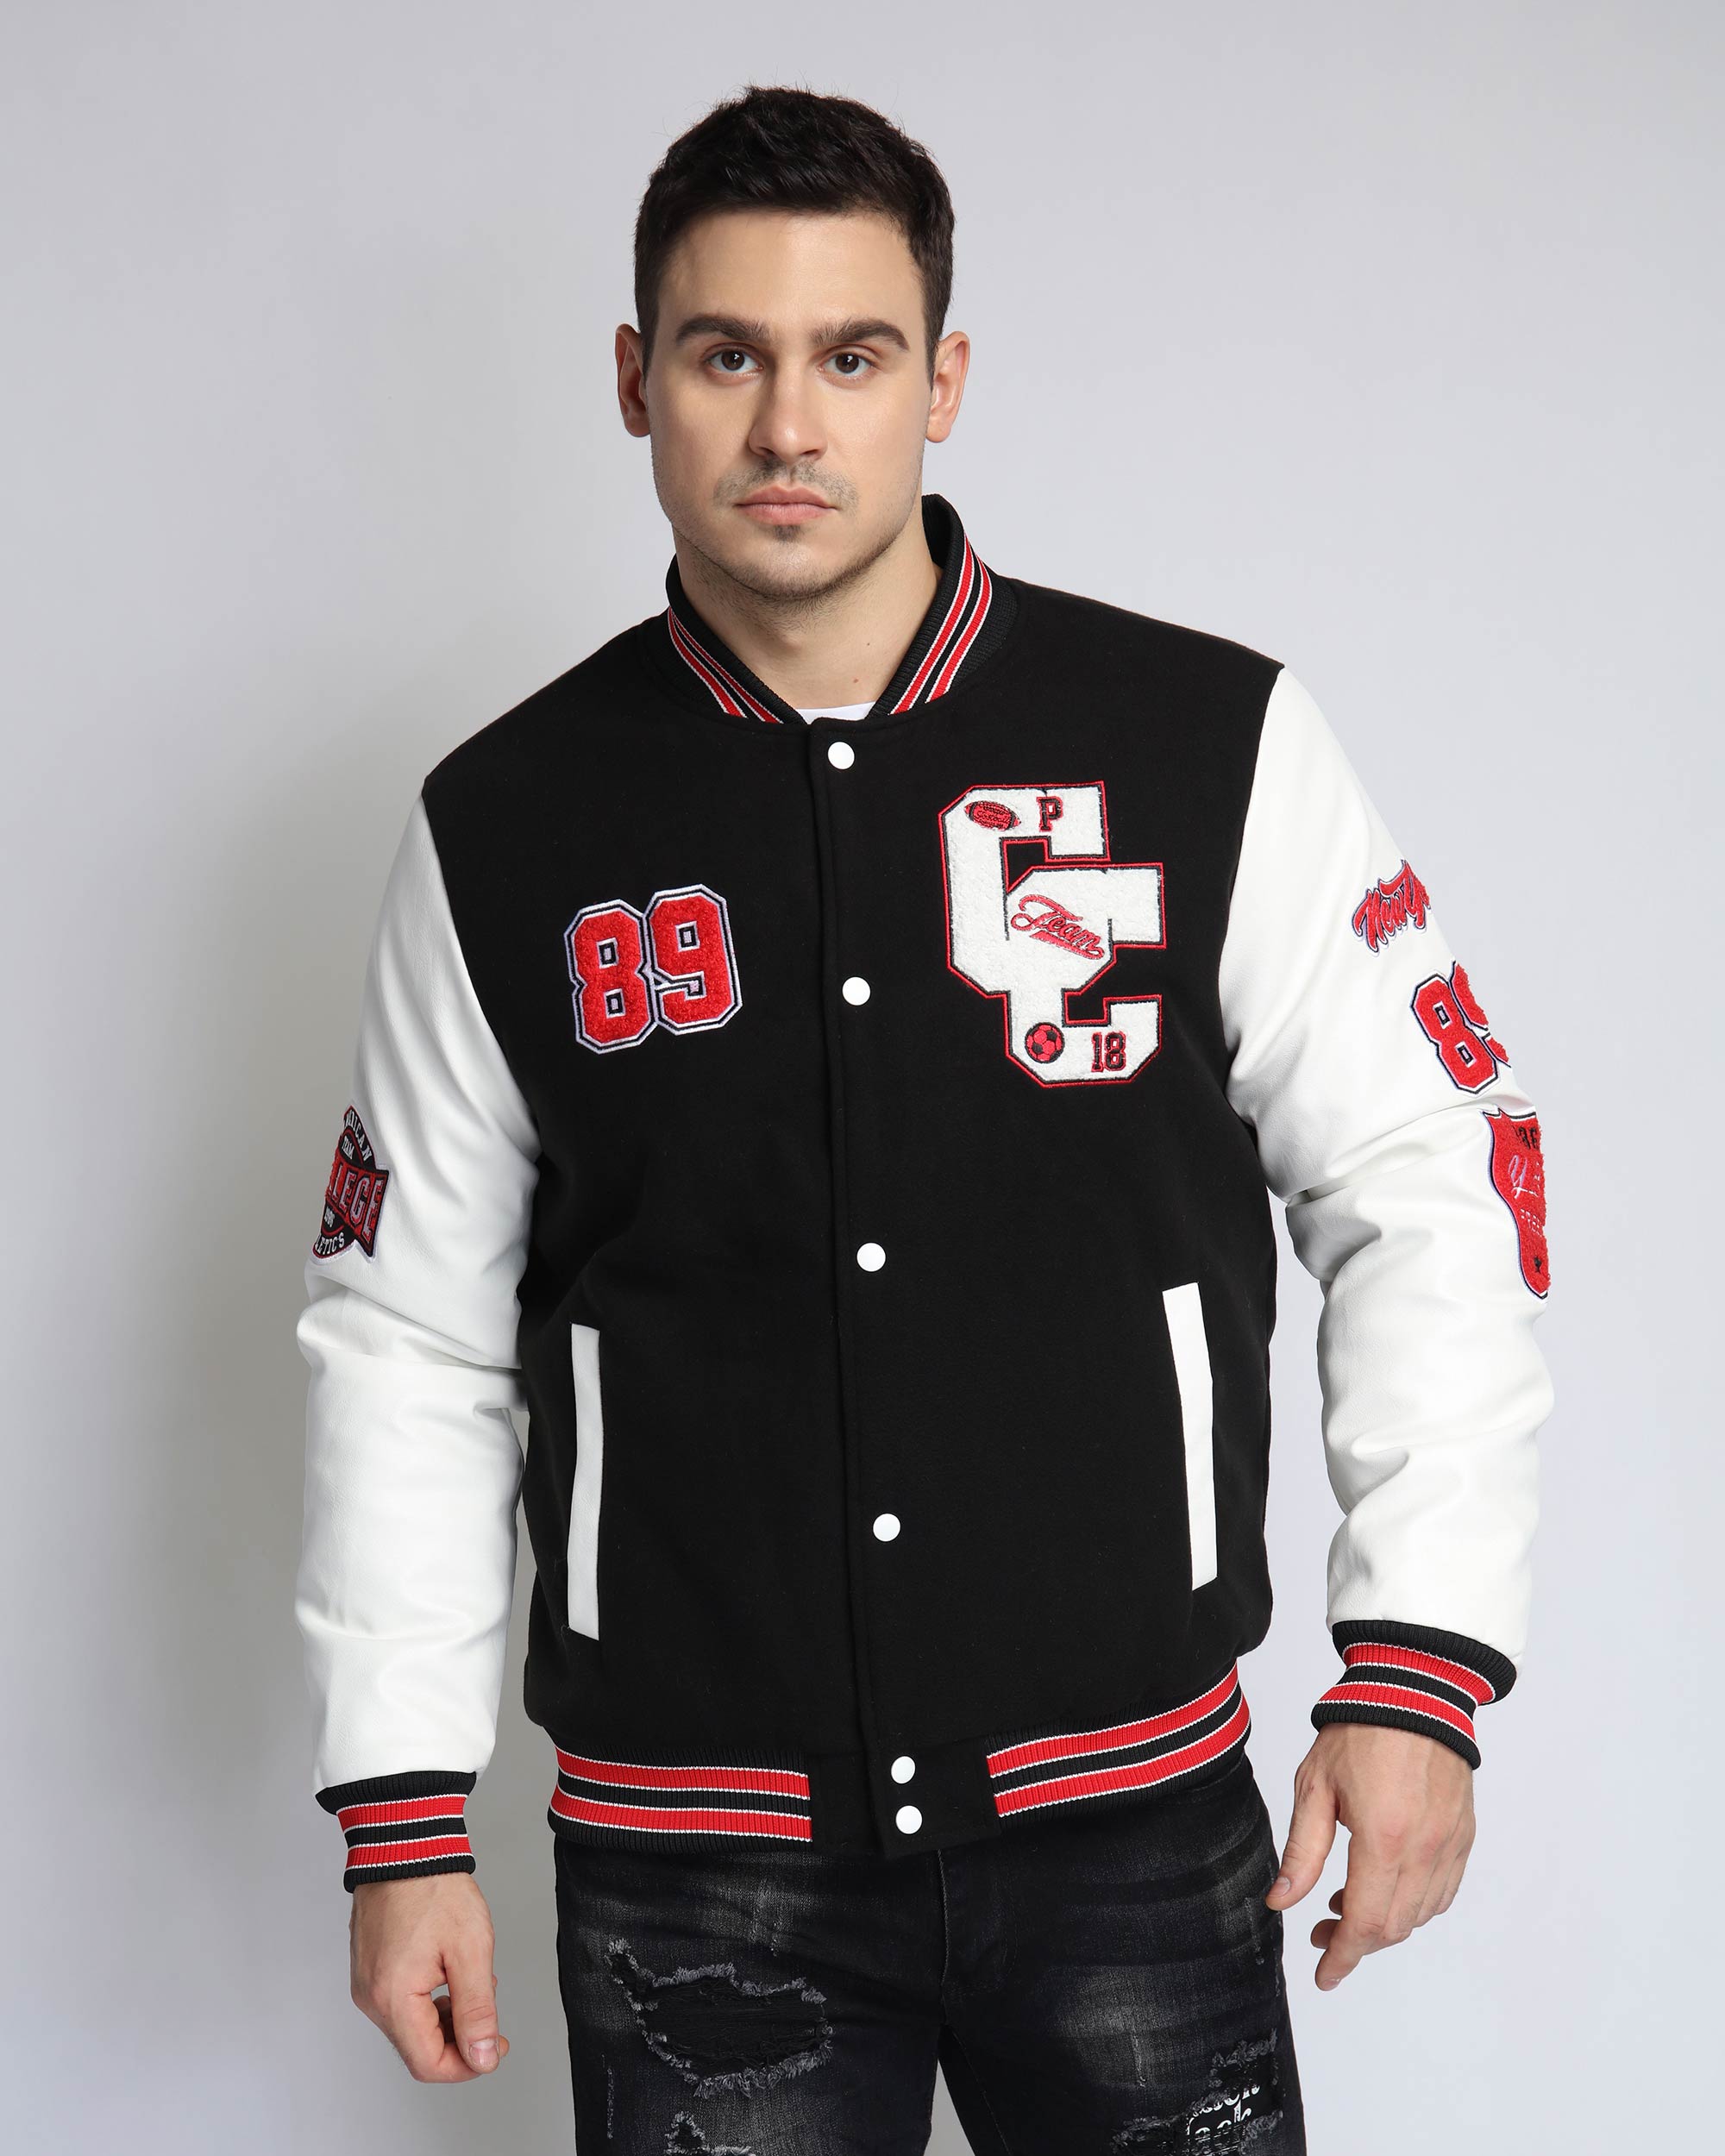 Contemporary Cool: Men's Baseball Bomber Jacket with Contrast Sleeves ...